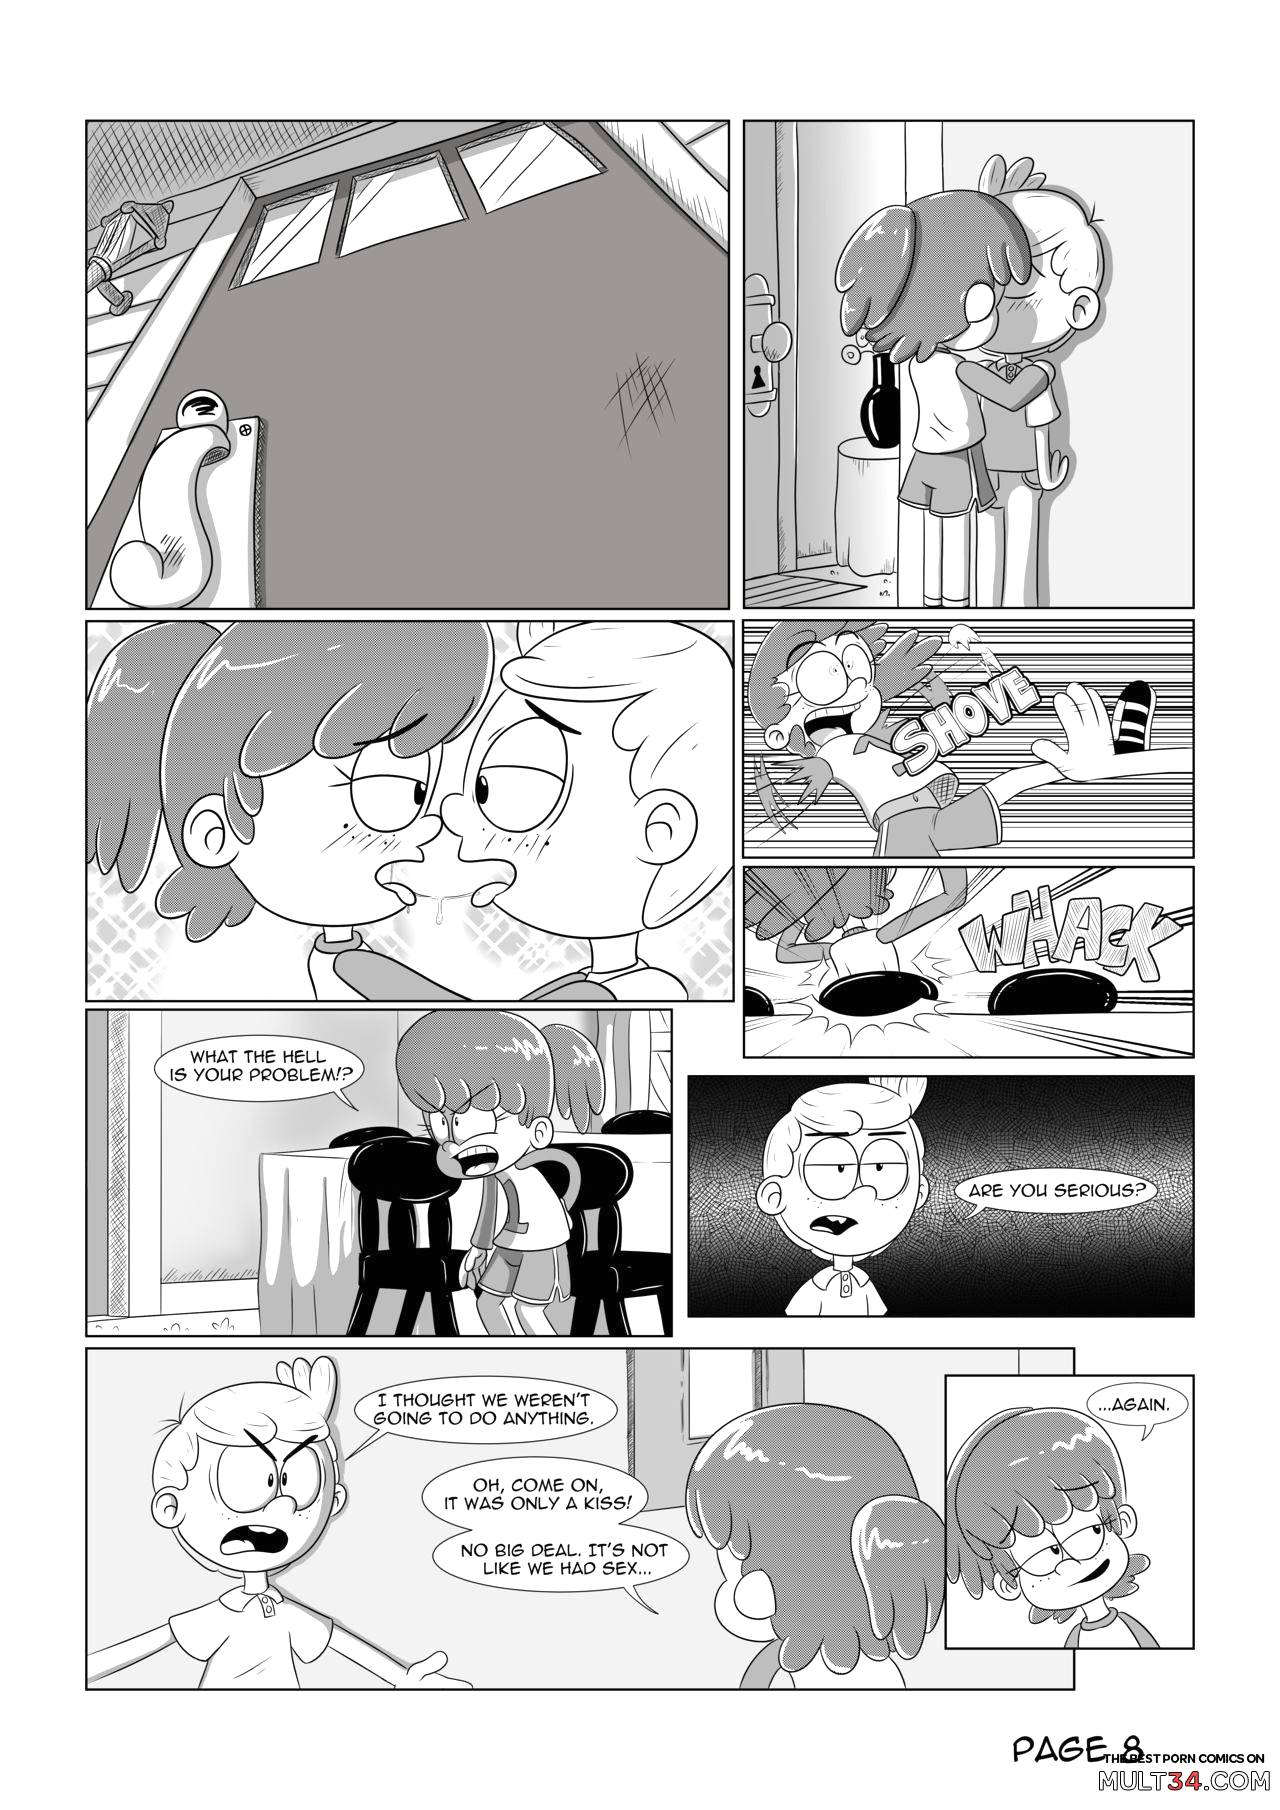 The loud house comic, chapter 3 page 9